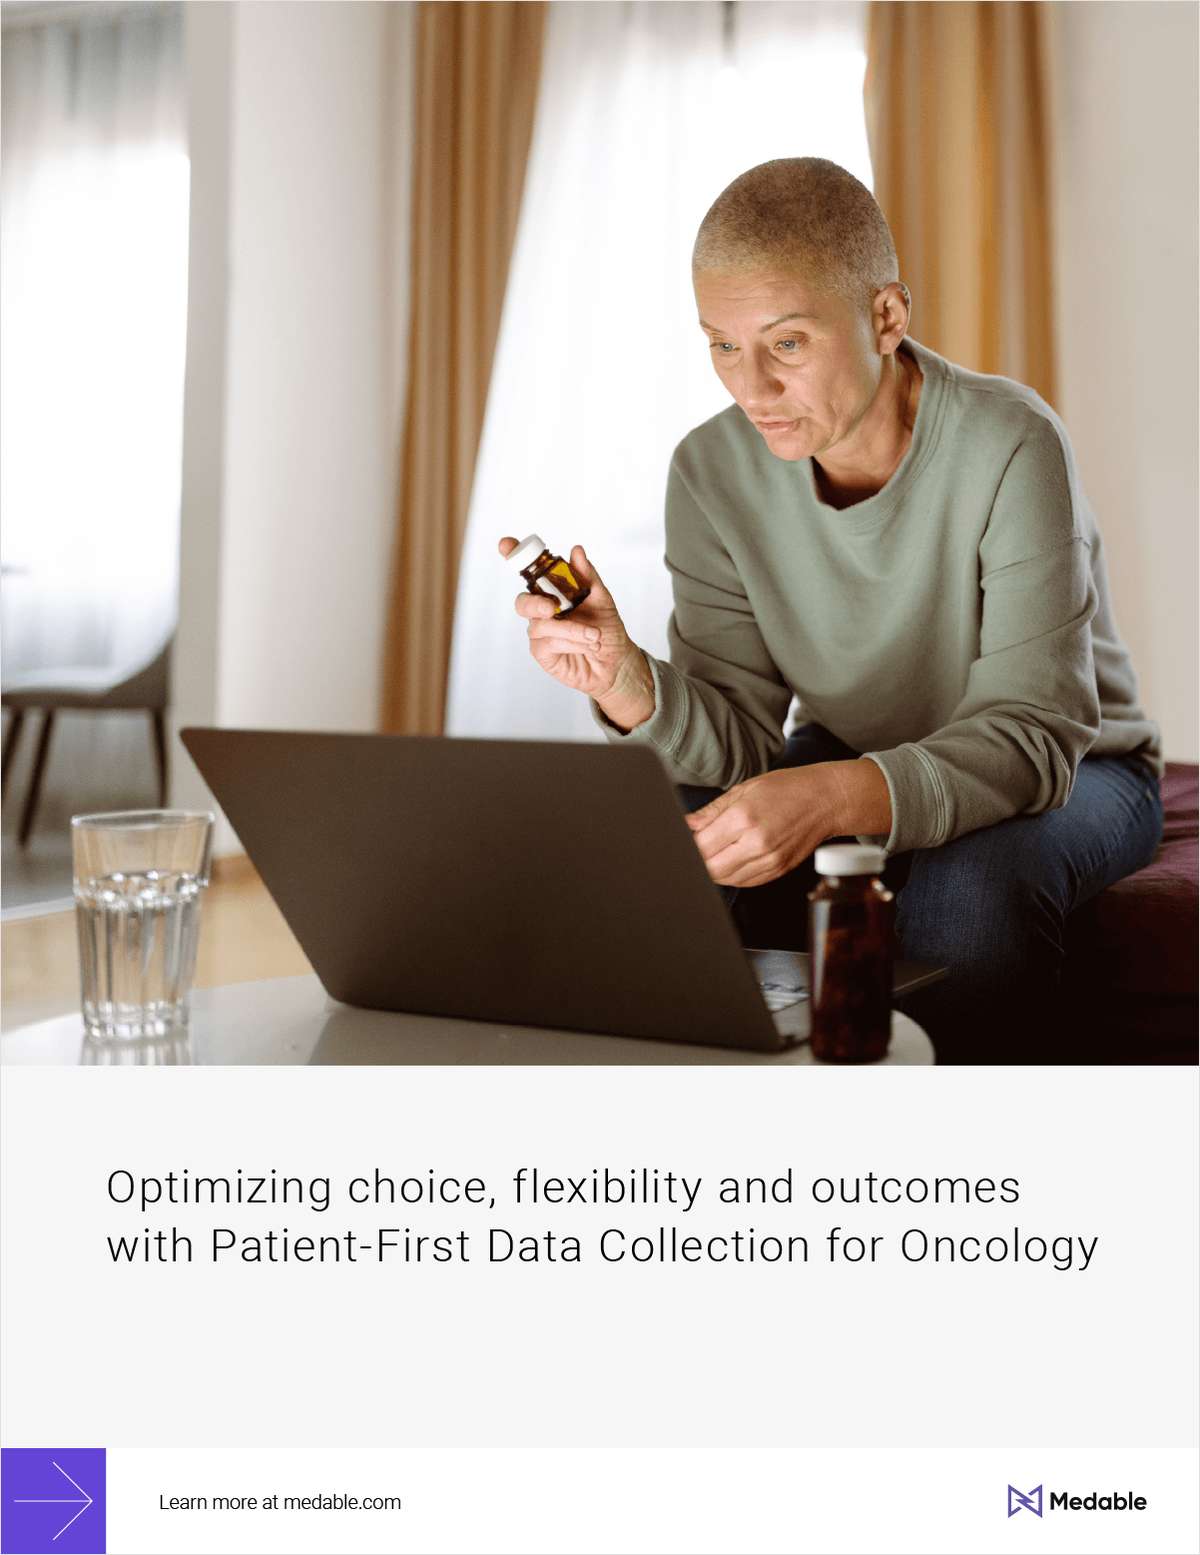 Optimizing choice, flexibility and outcomes with Patient-First Data Collection for Oncology